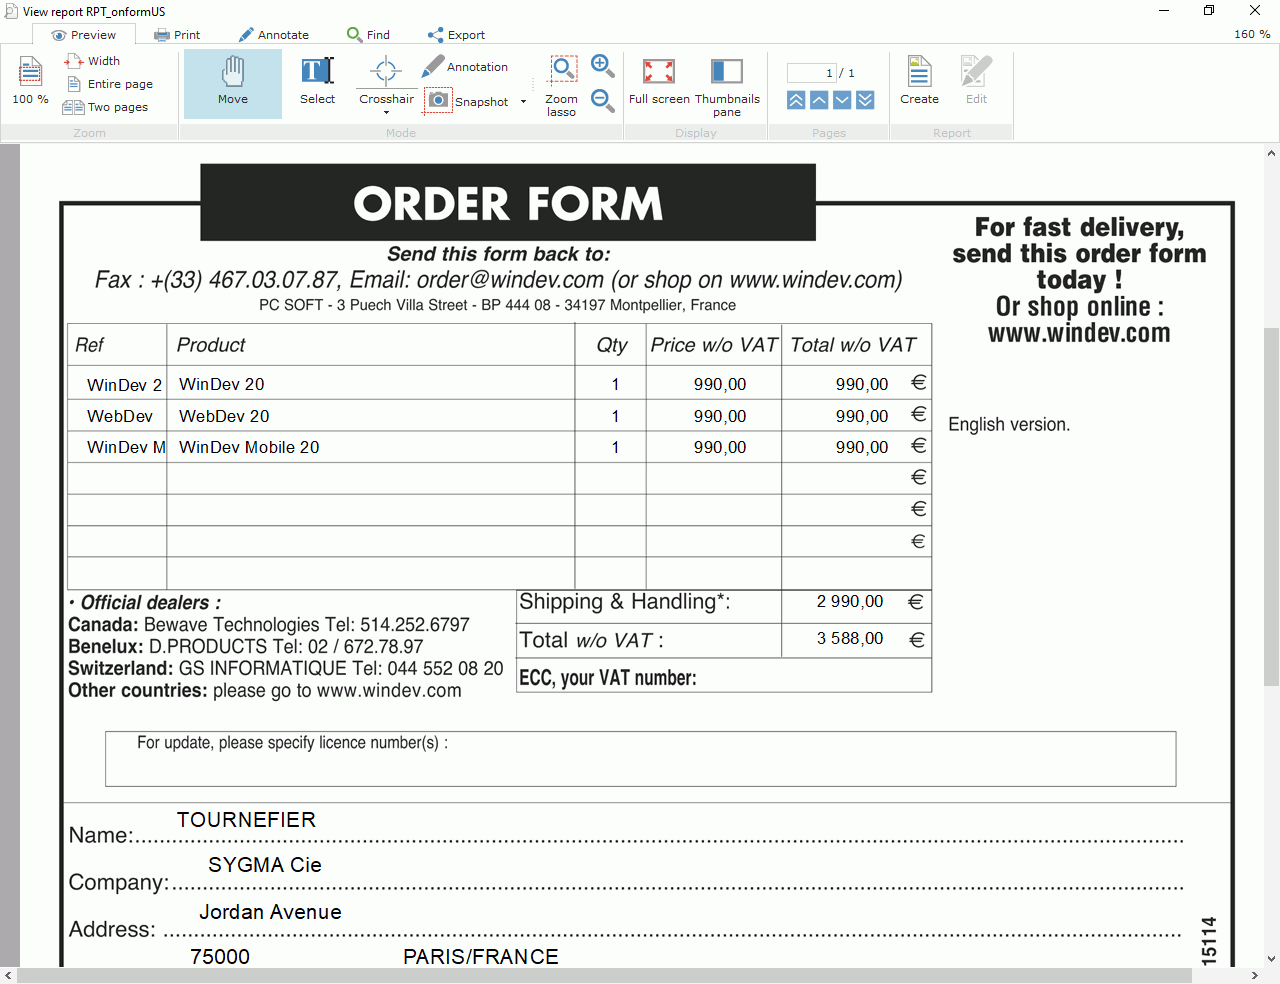 Report on form